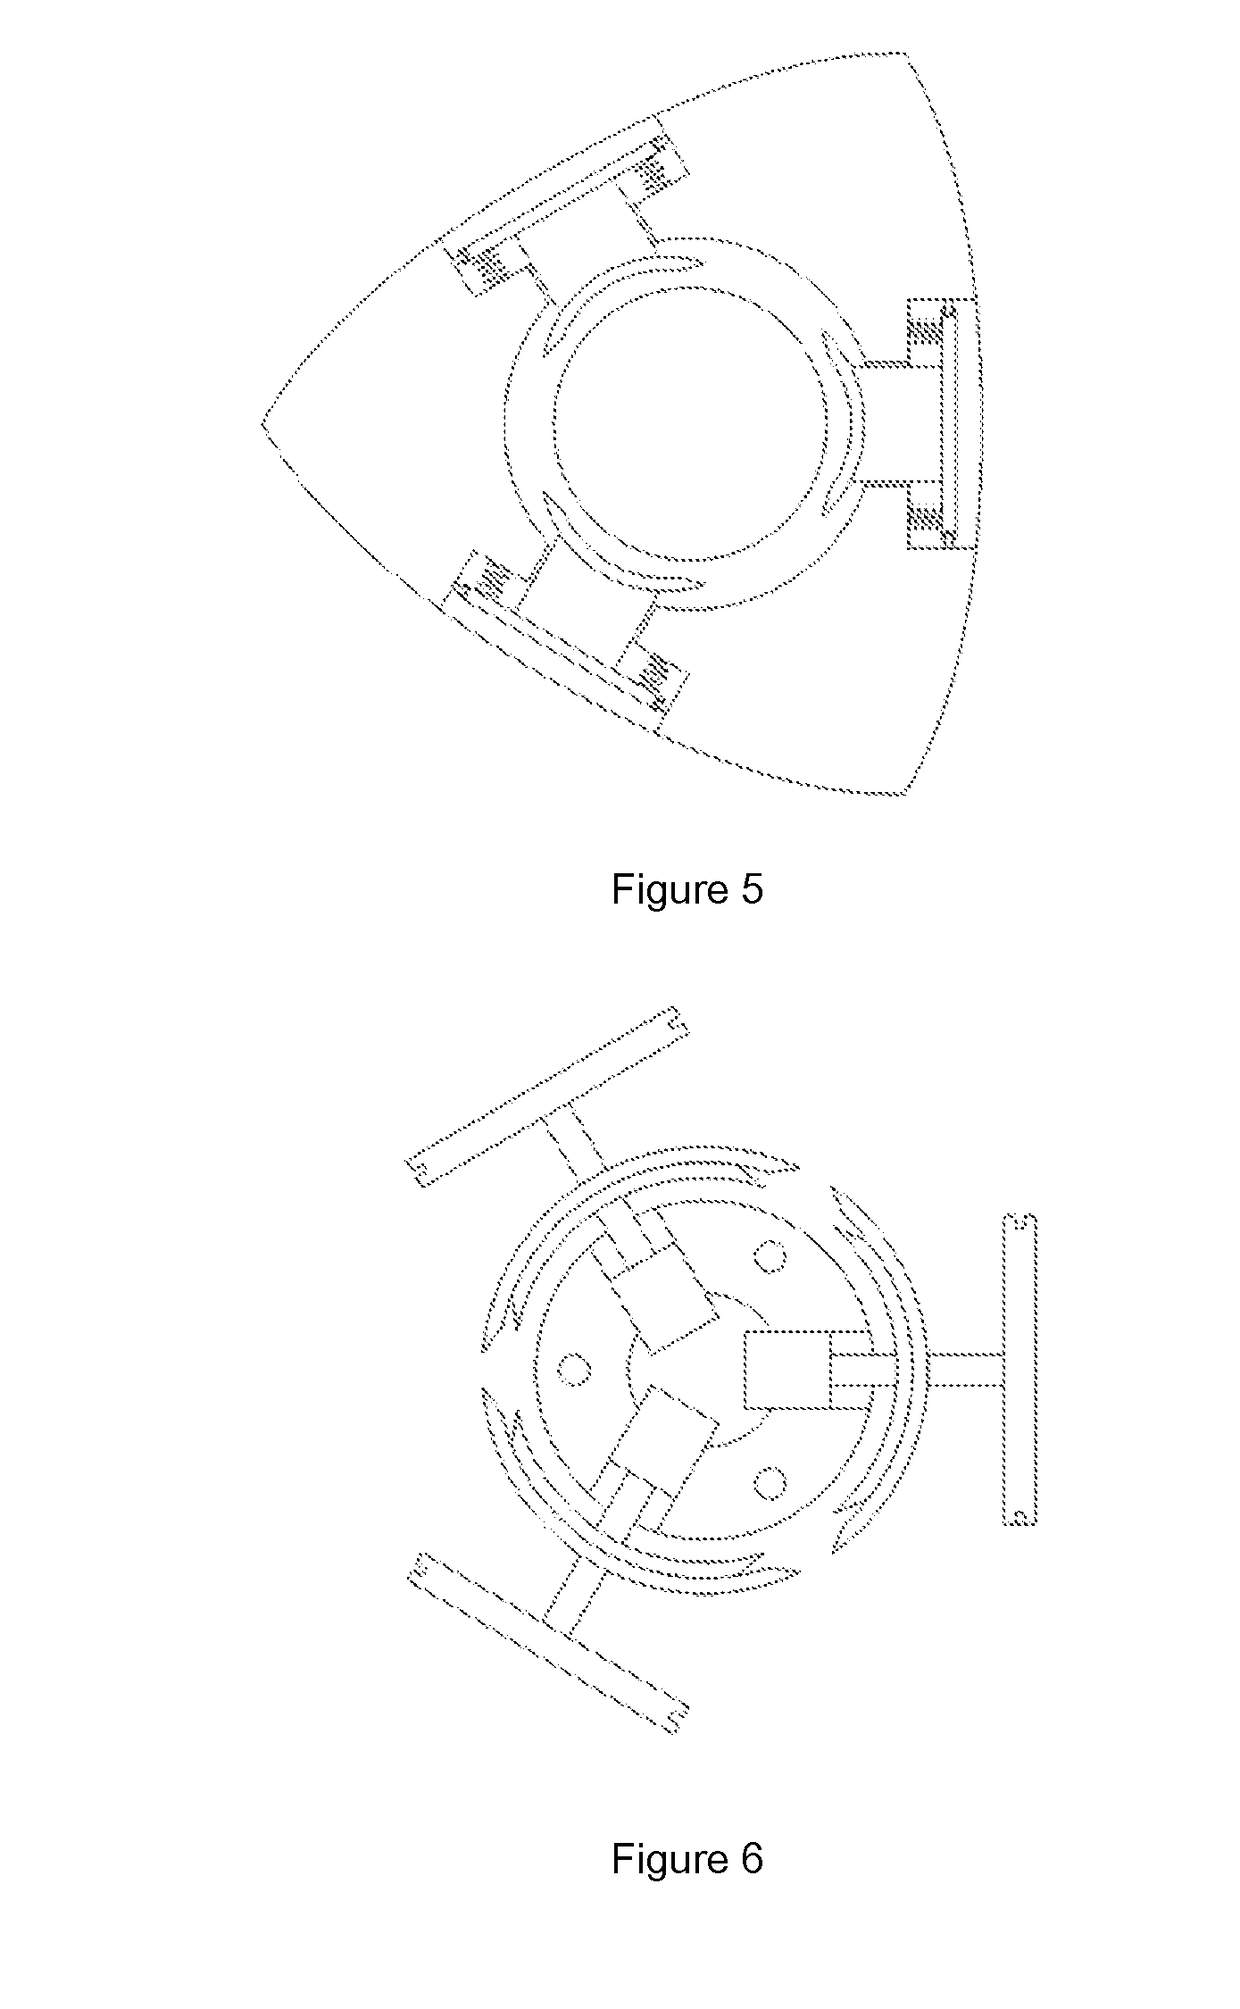 Control device to achieve variable compression ratio for triangle rotary engine